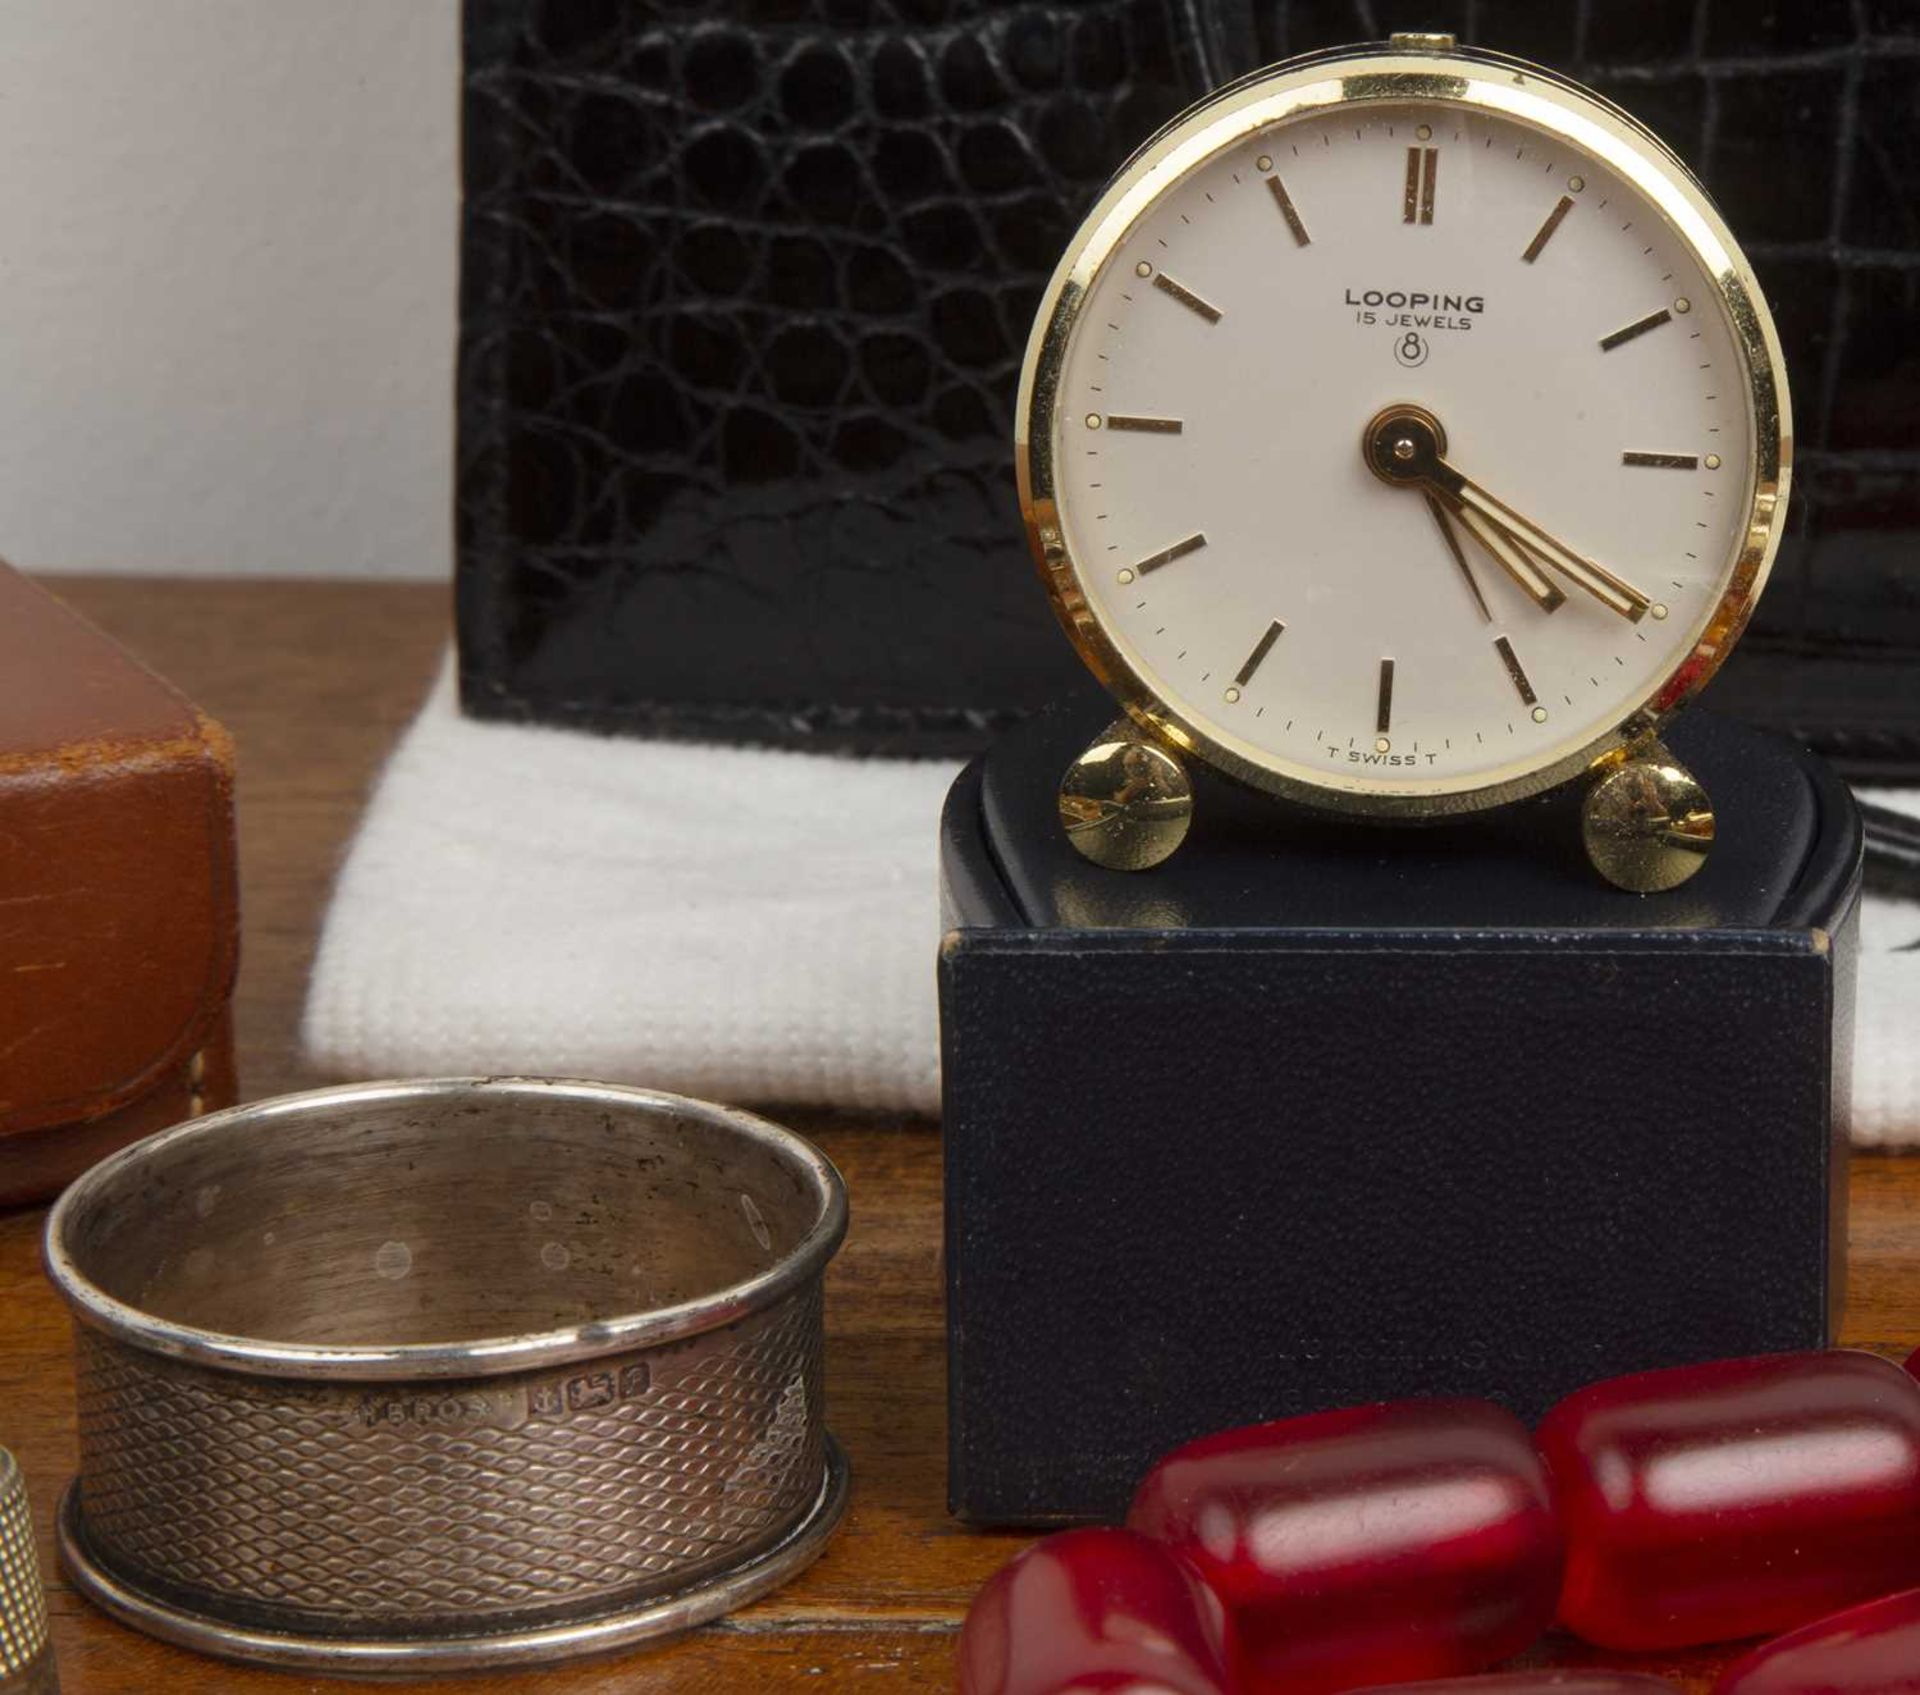 Collection of miscellaneous jewellery a vintage ladies handbag, a white metal Omani bracelet, a - Image 3 of 6